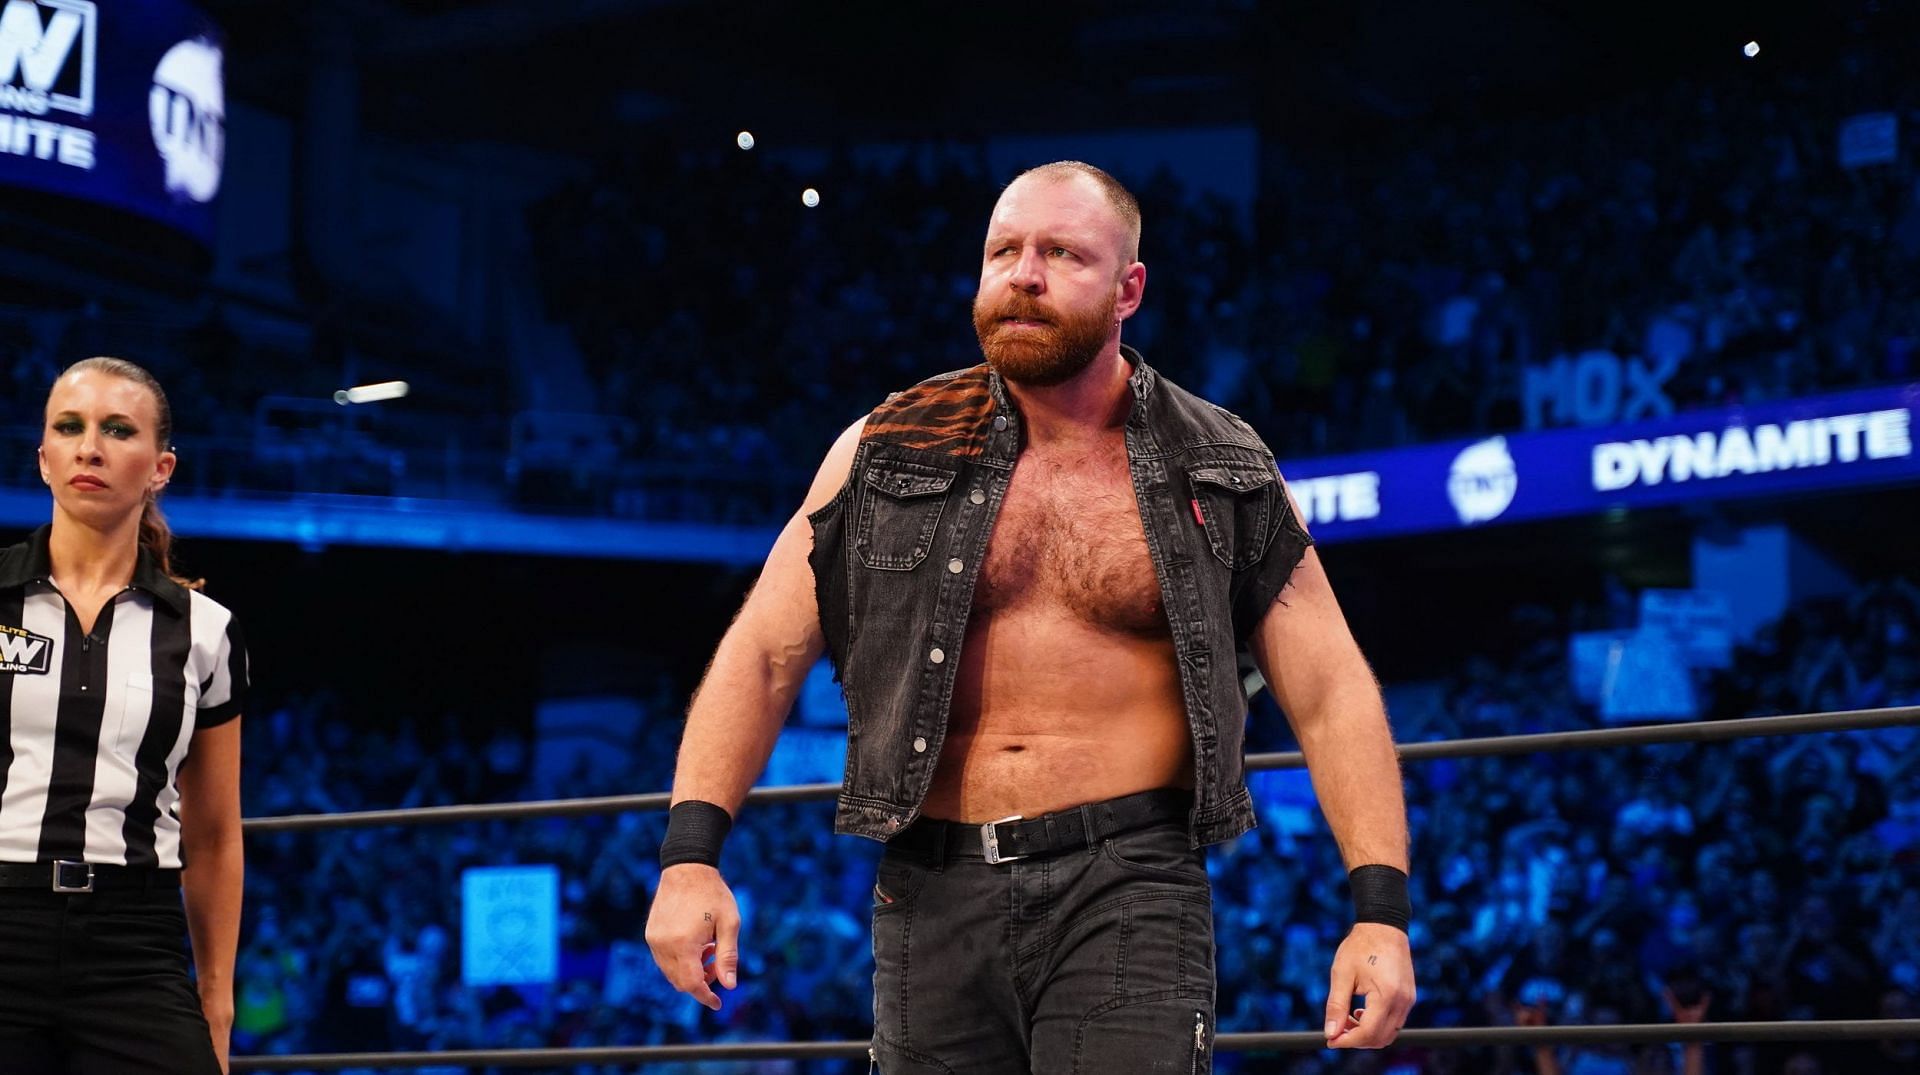 Jon Moxley heavily praised a match at AEW Rampage